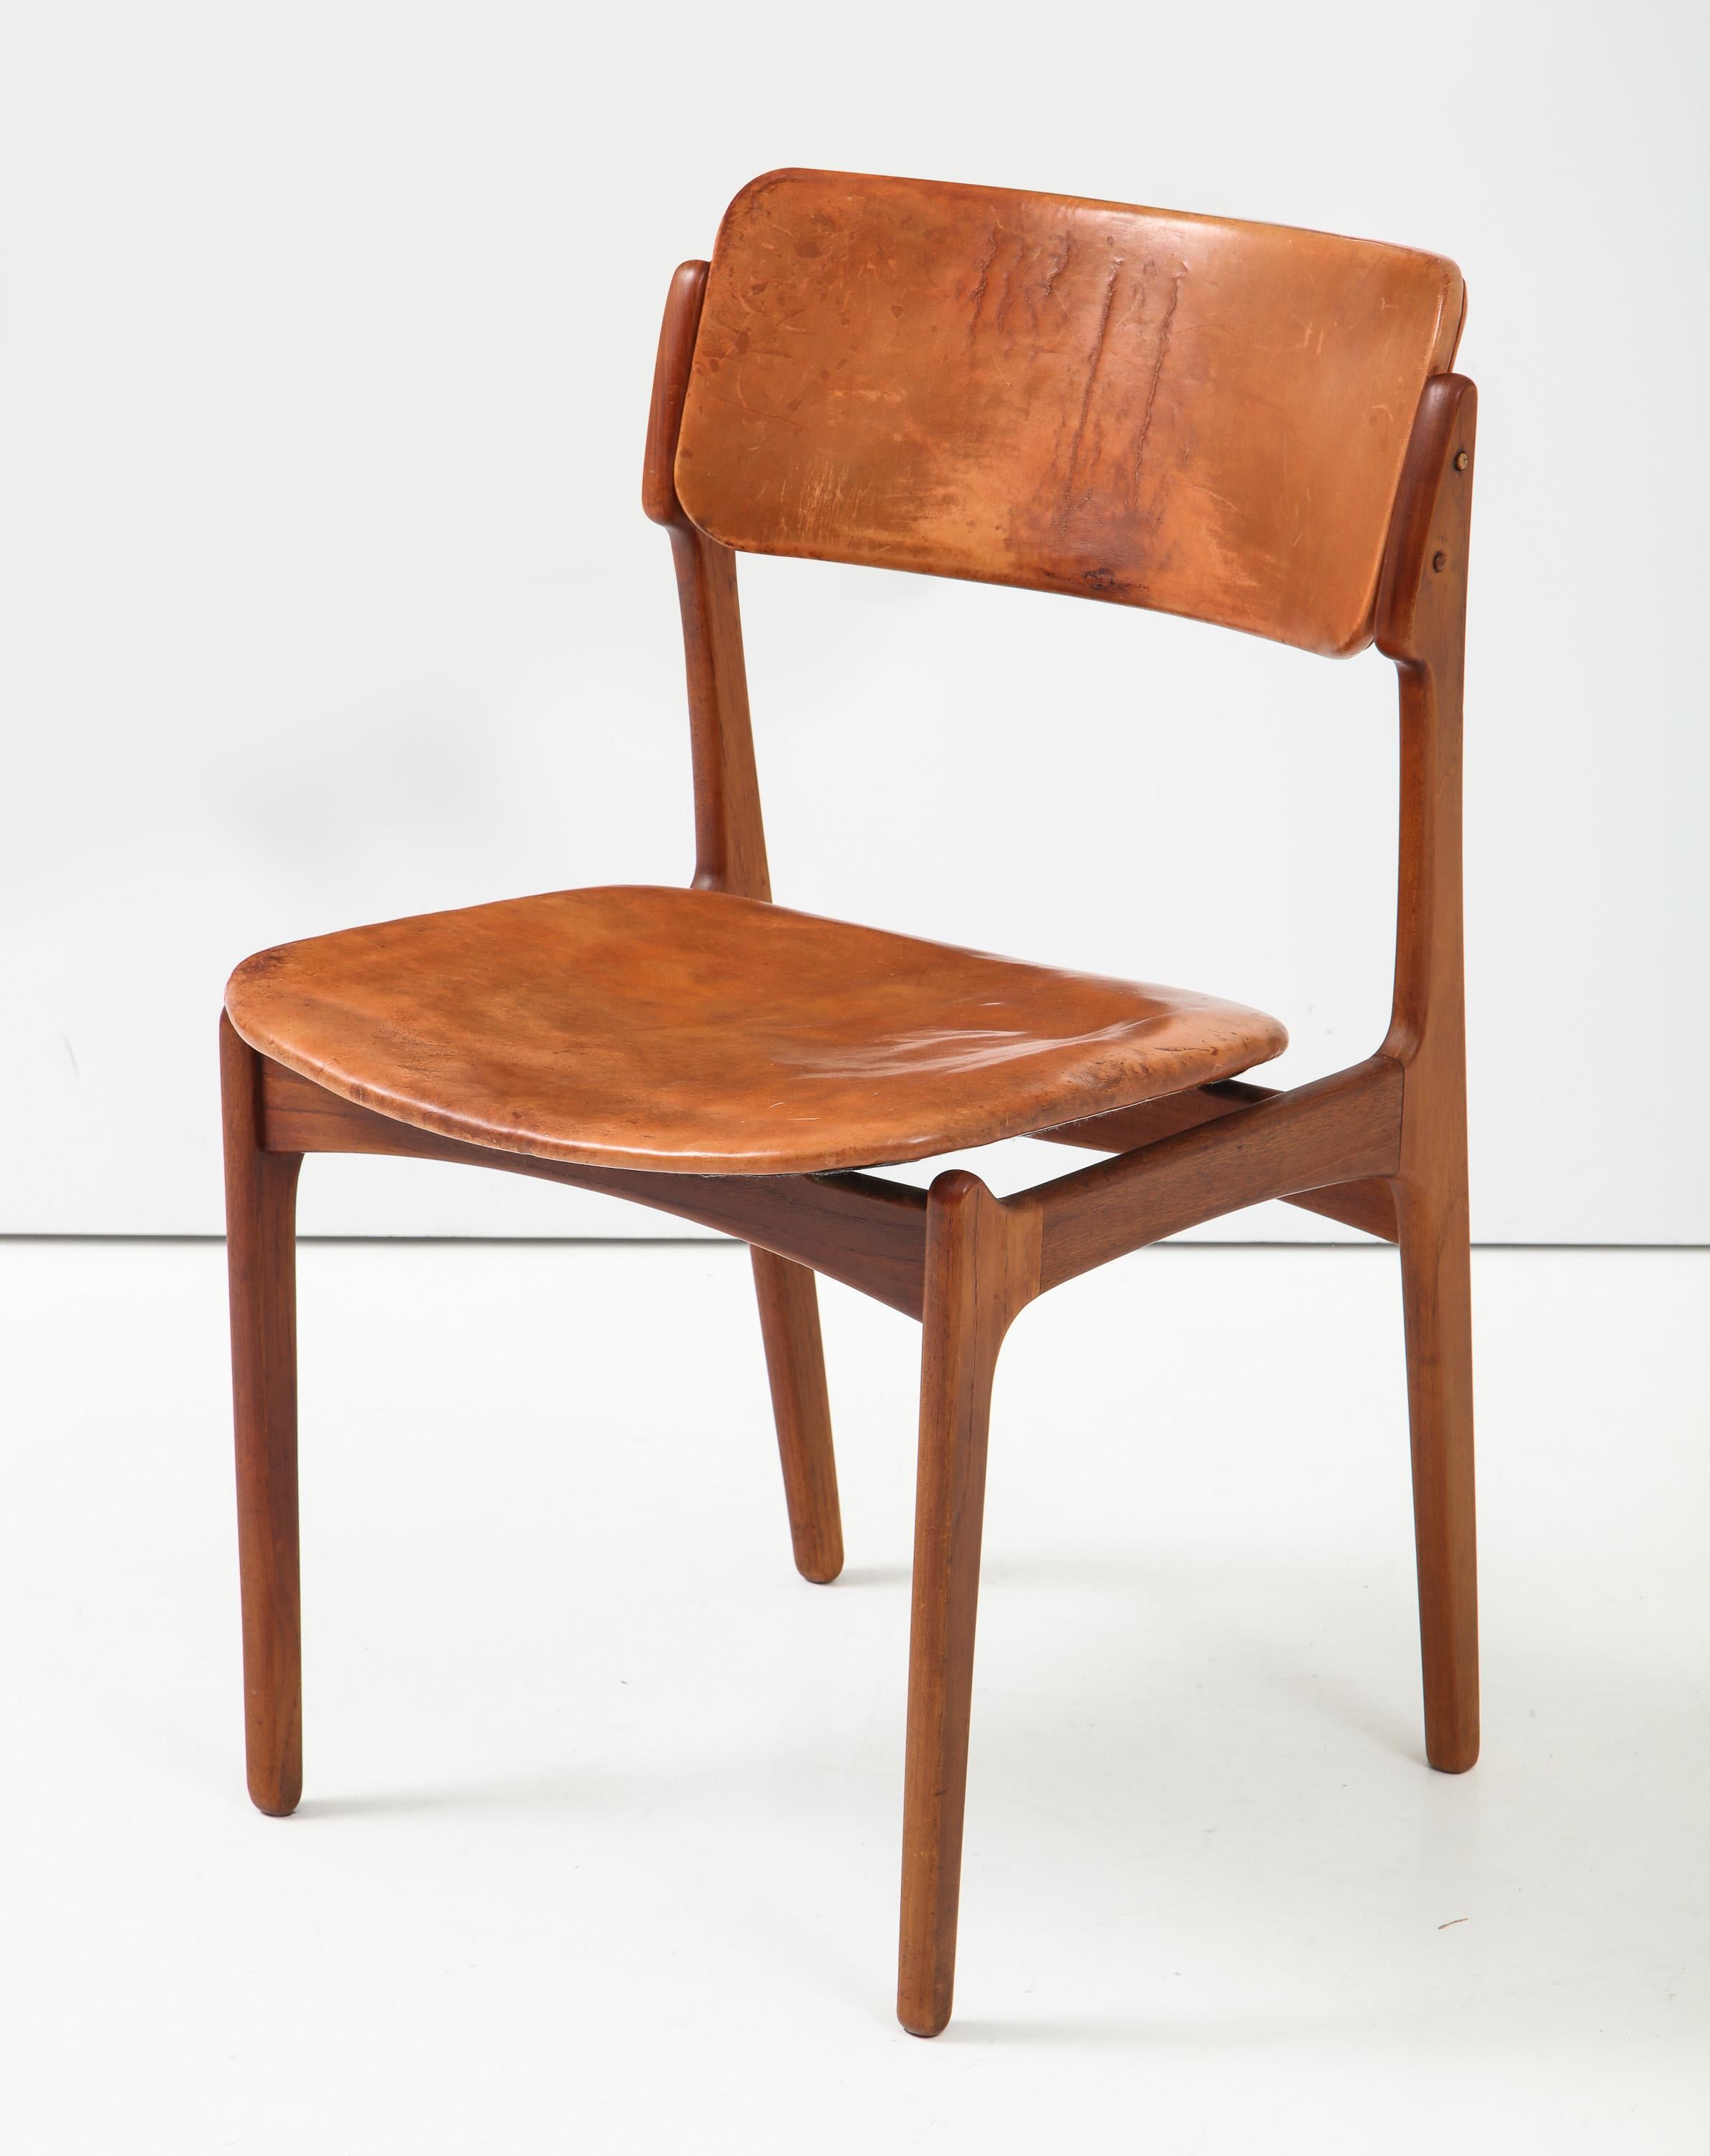 Model 49 chair by Danish designer Erik Buck, made by the Poul Dinesen cabinet shop, circa 1950s. An early example of this classic design, with great character and patina, pre-dating the mass production run by Oddense. With pegged butt joints,